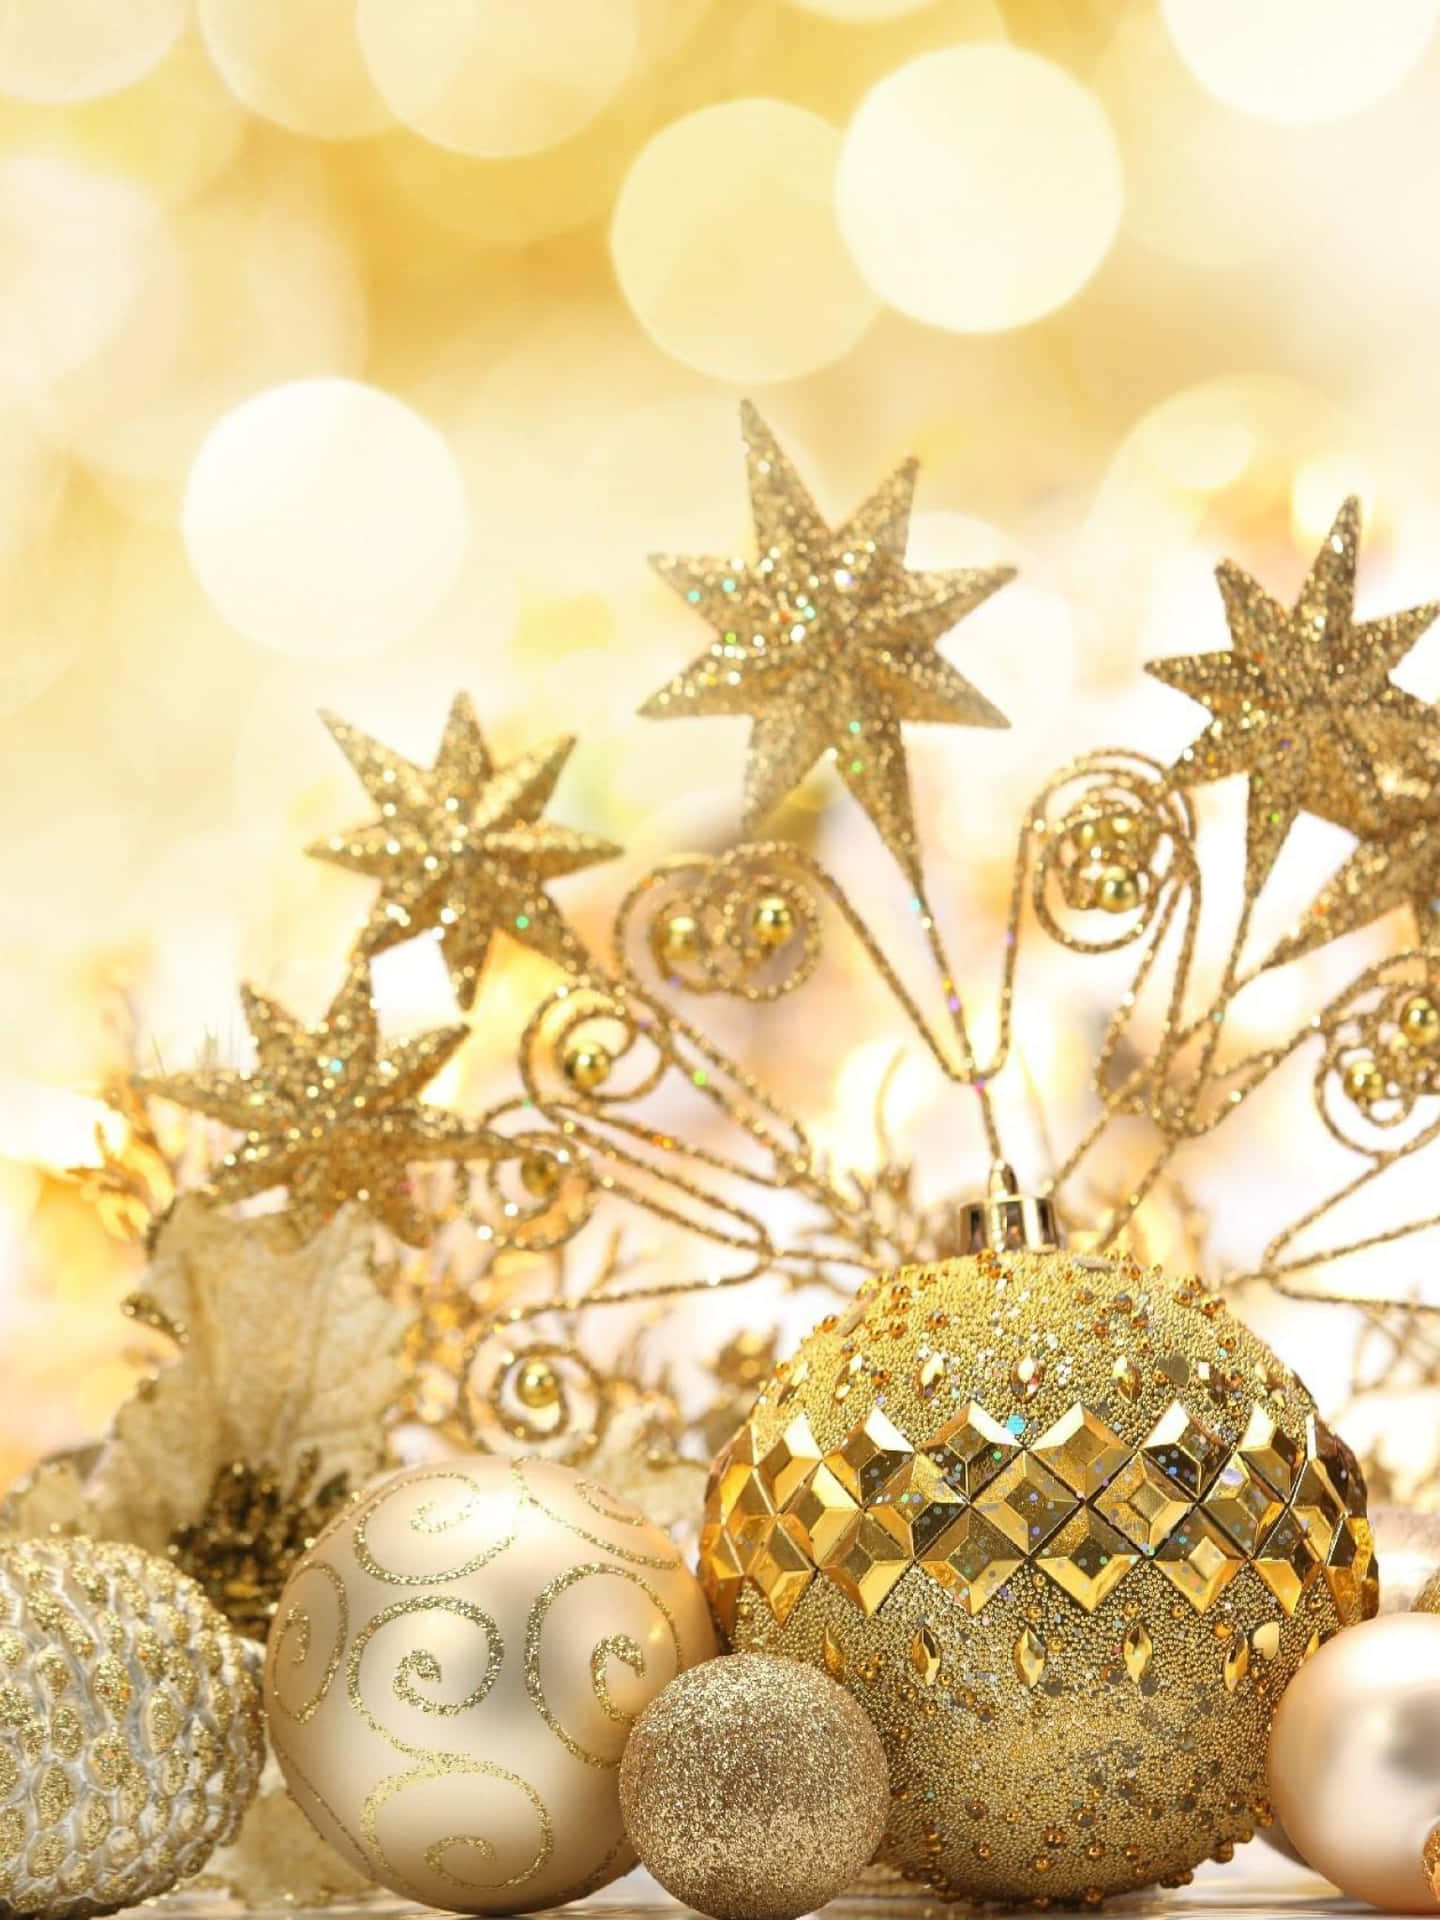 New Year Iphone Gold Ornaments Wallpaper